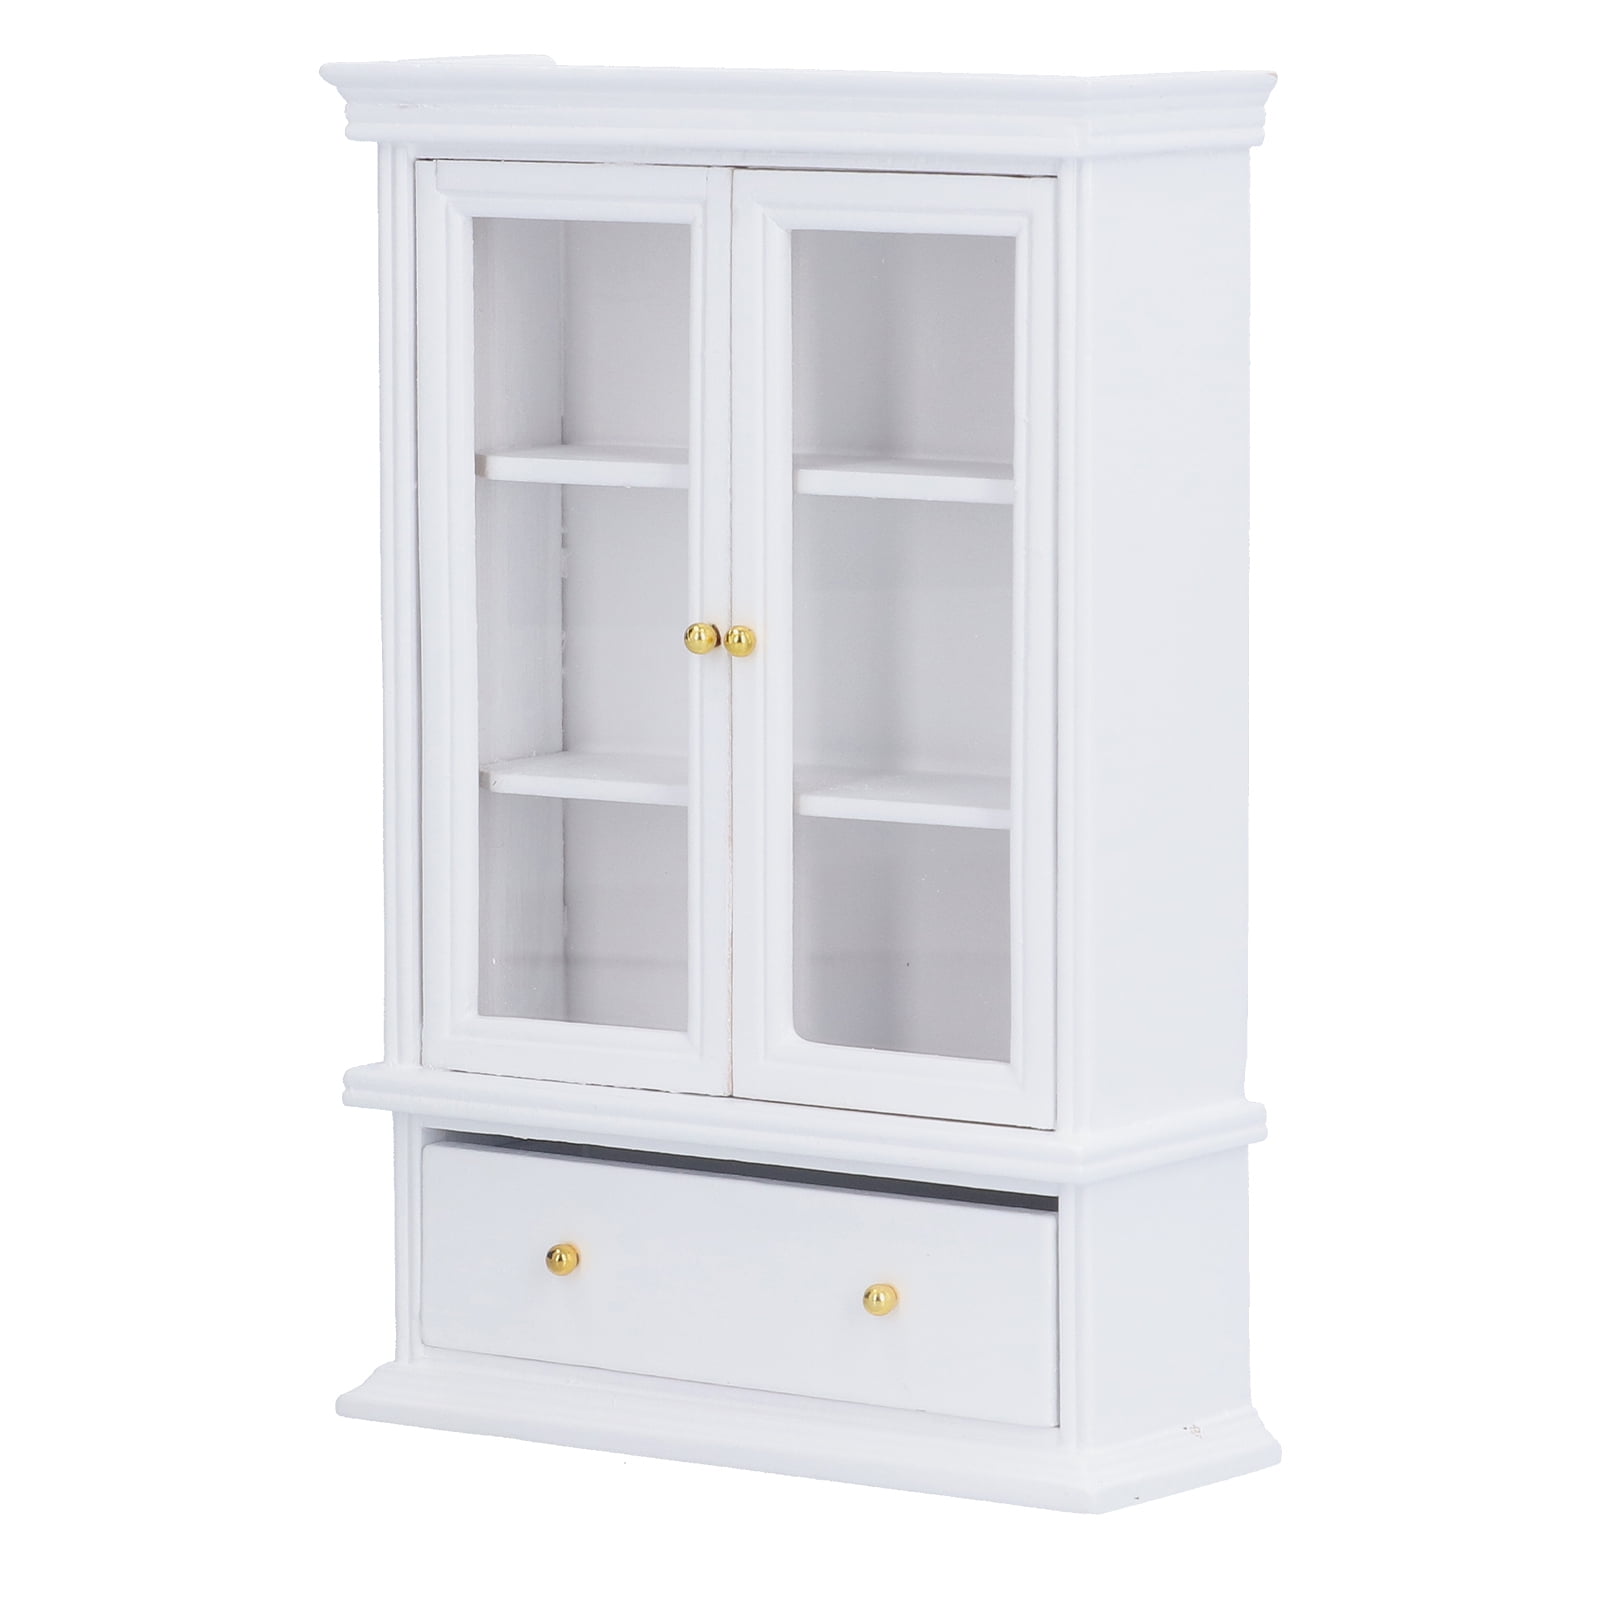 1:12 scale fine dollhouse miniature furniture well made white painted cabinet 